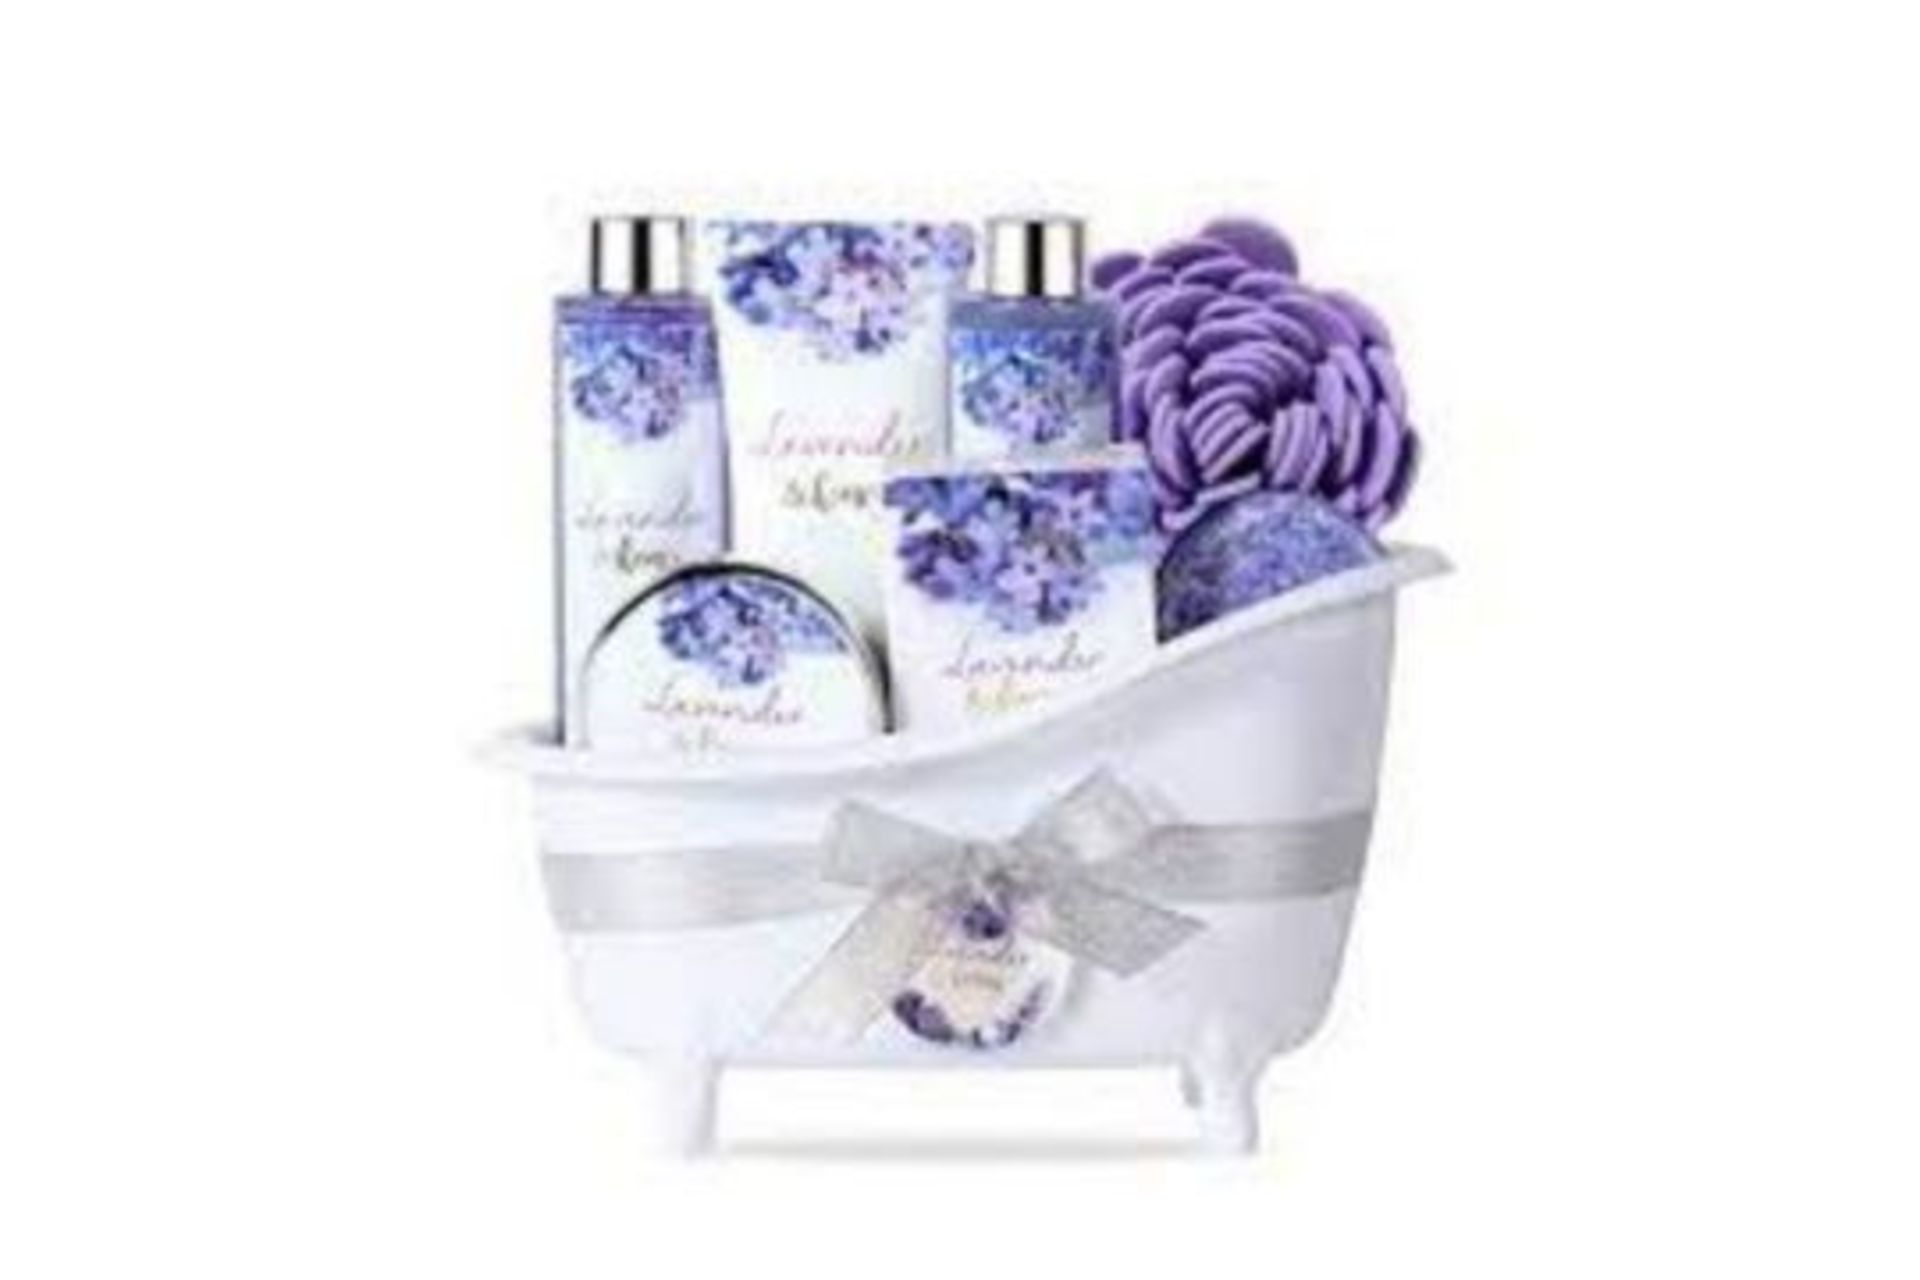 PALLET TO CONTAIN 48 X NEW PACKAGED BODY & EARTH Lavender & Honey Spa Bathtub Set. (AMABE-3-1) - Image 2 of 2